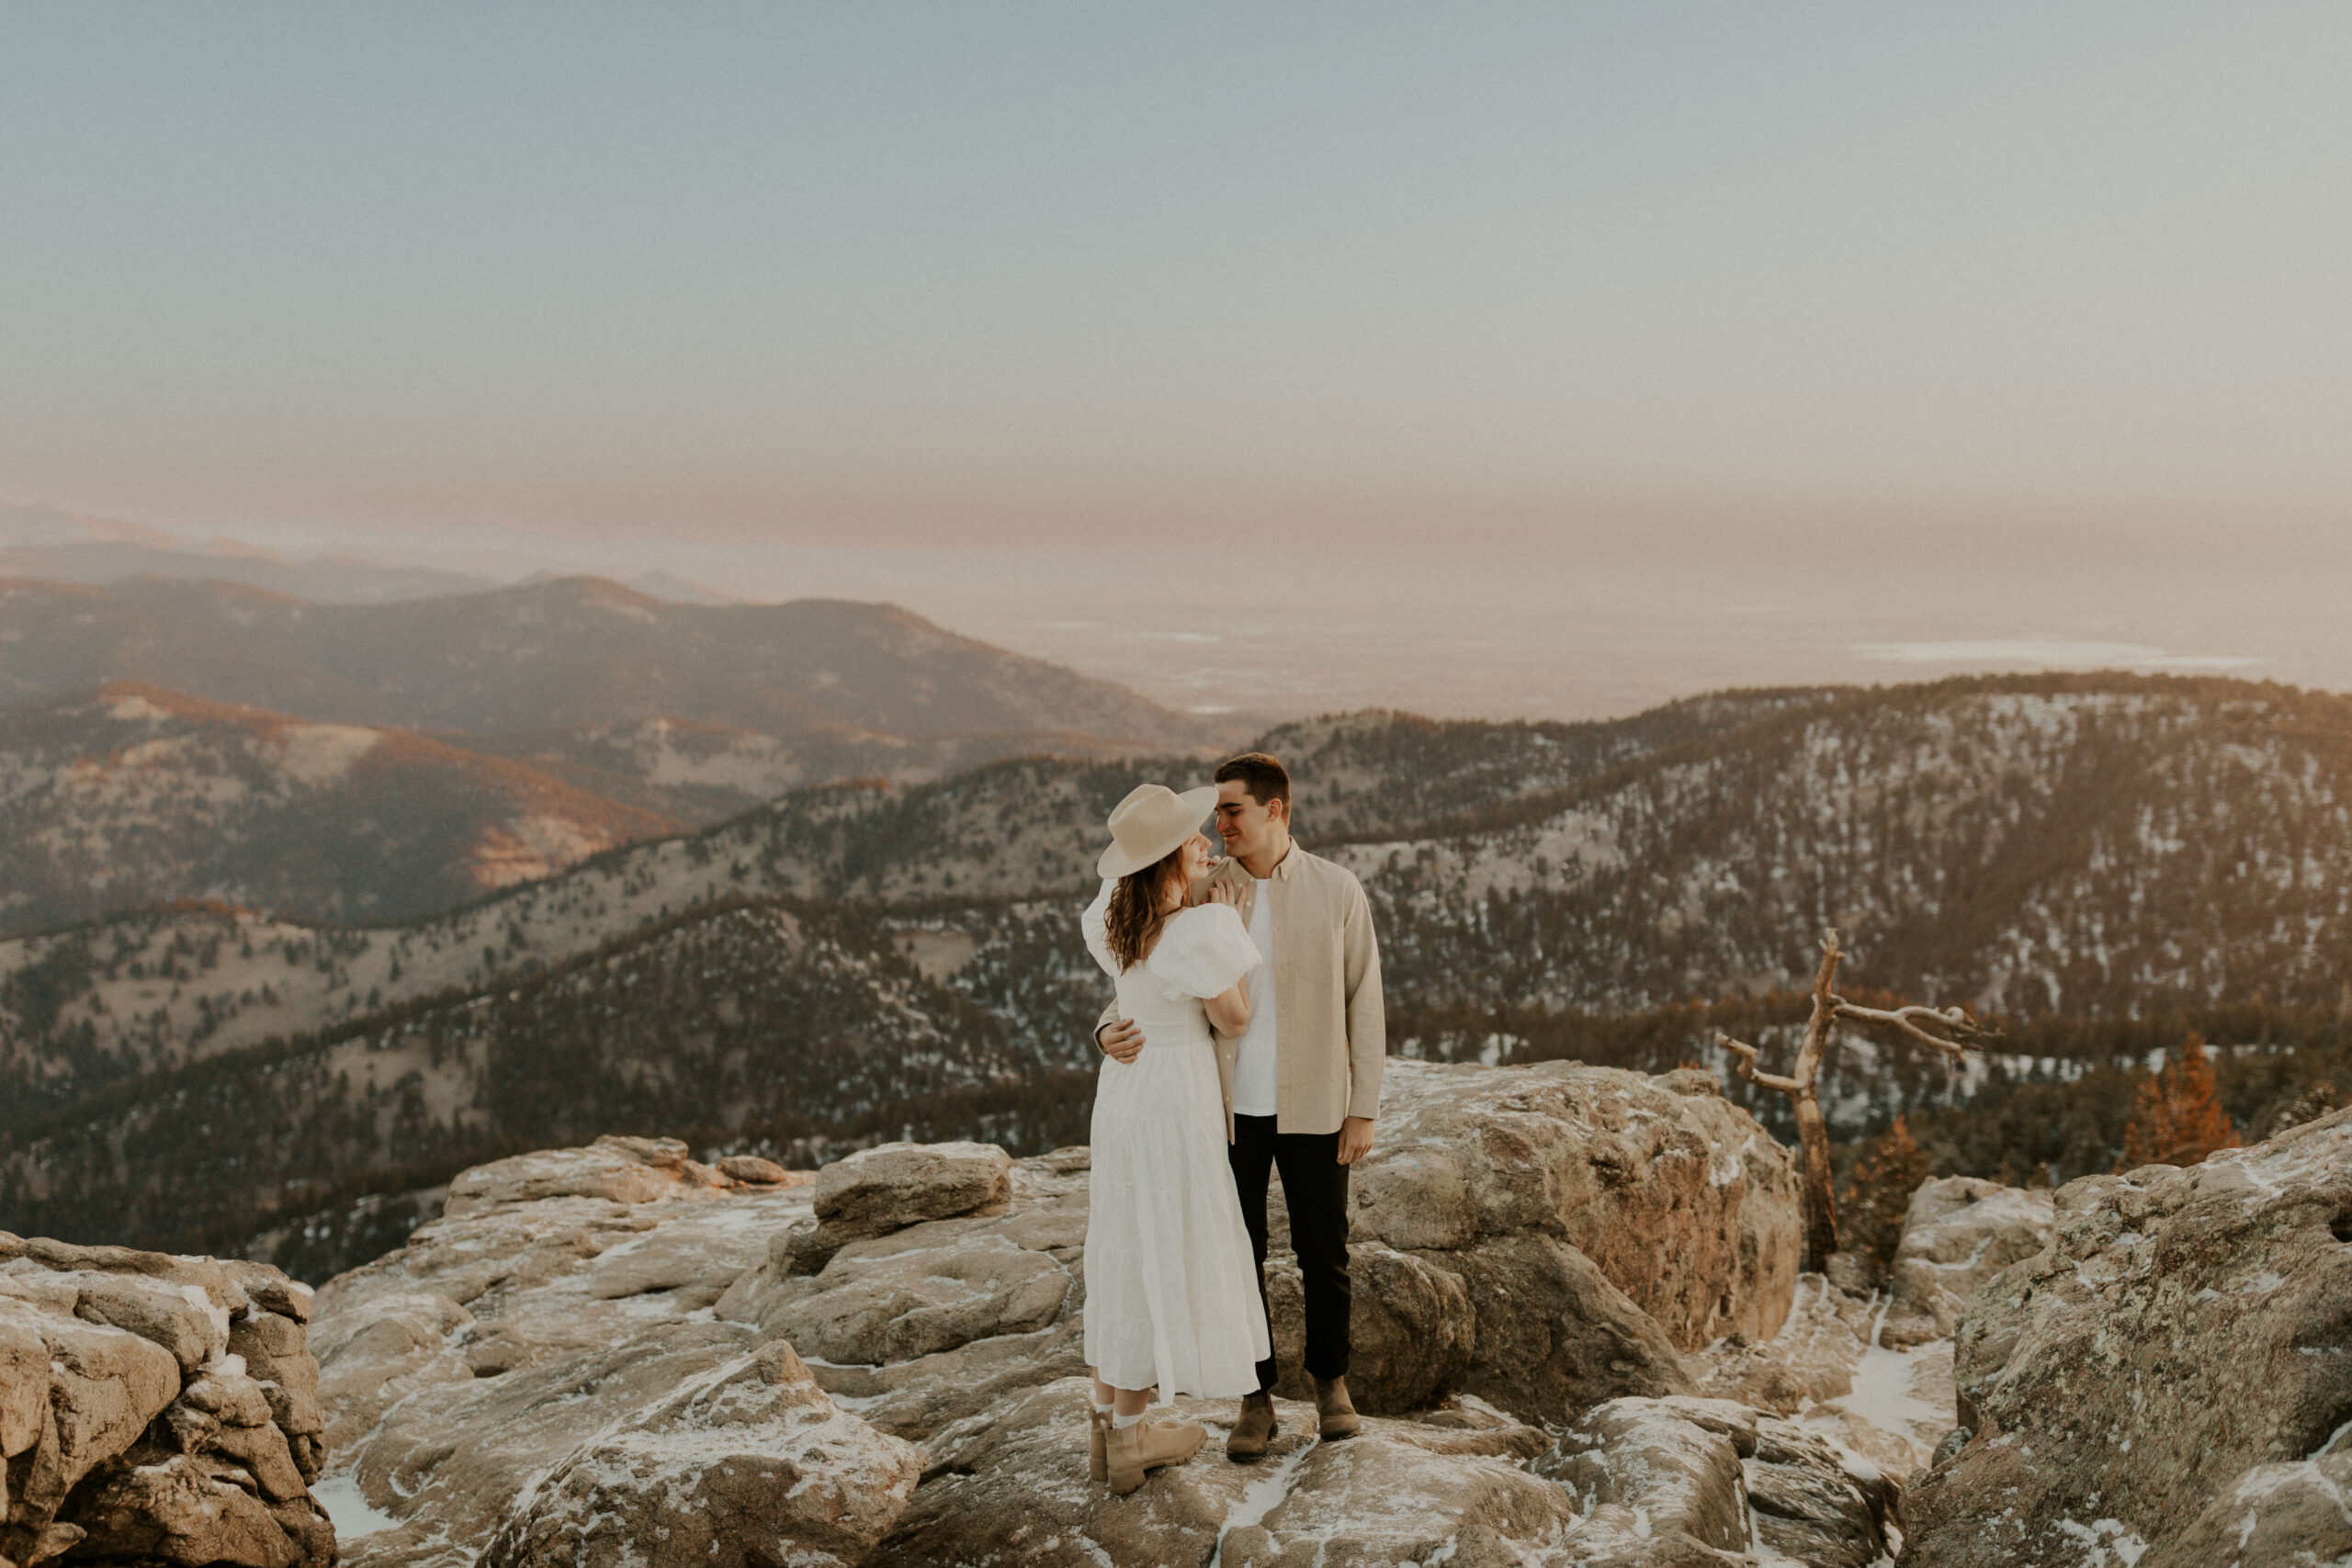 An intimate sunrise engagement session at a mountain overlook in Boulder, Colorado.